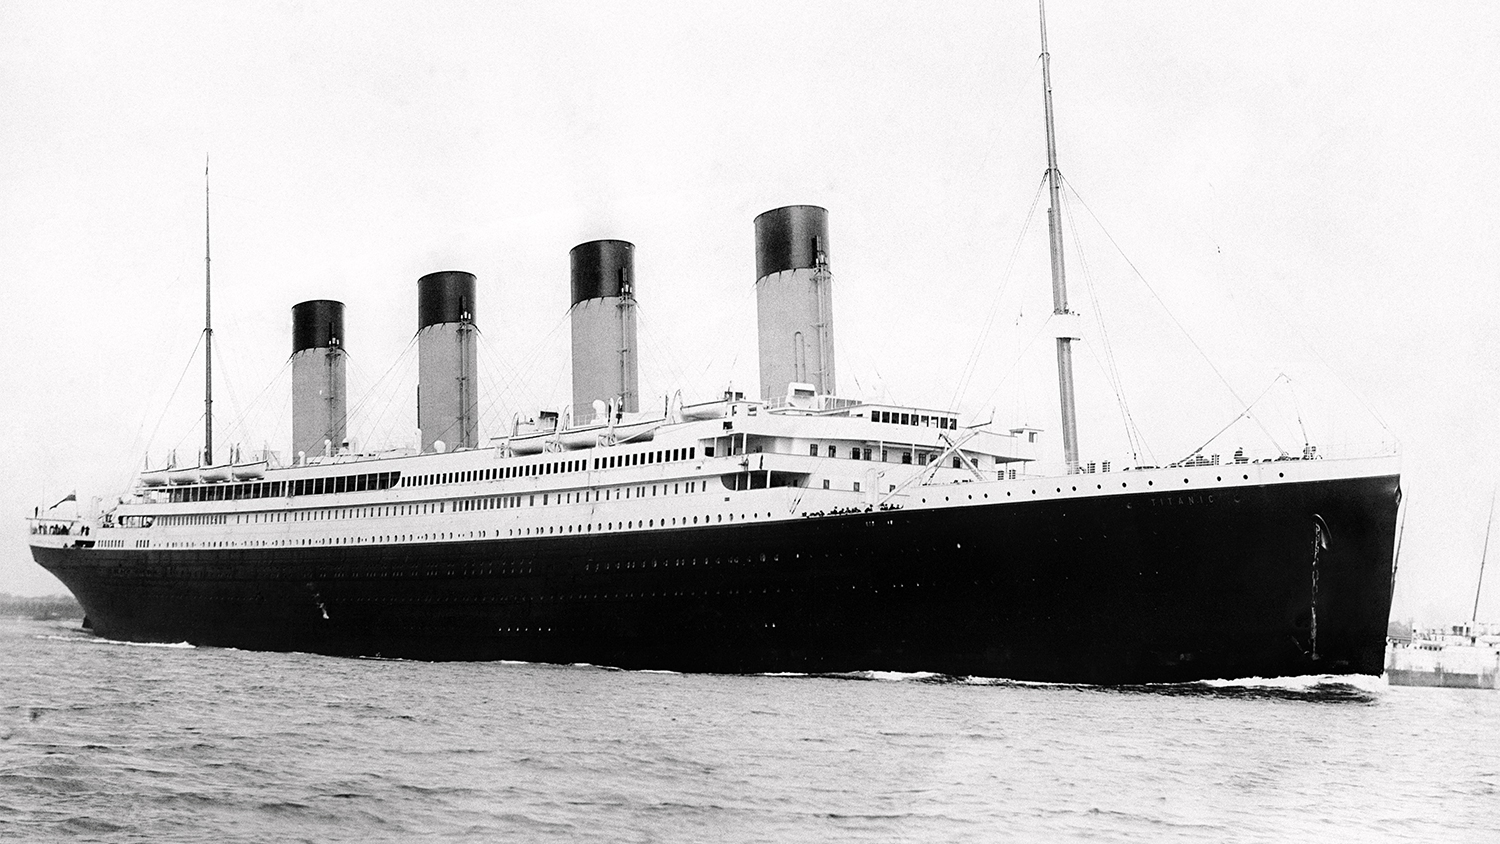 Diving tours to Titanic site to begin in 2018